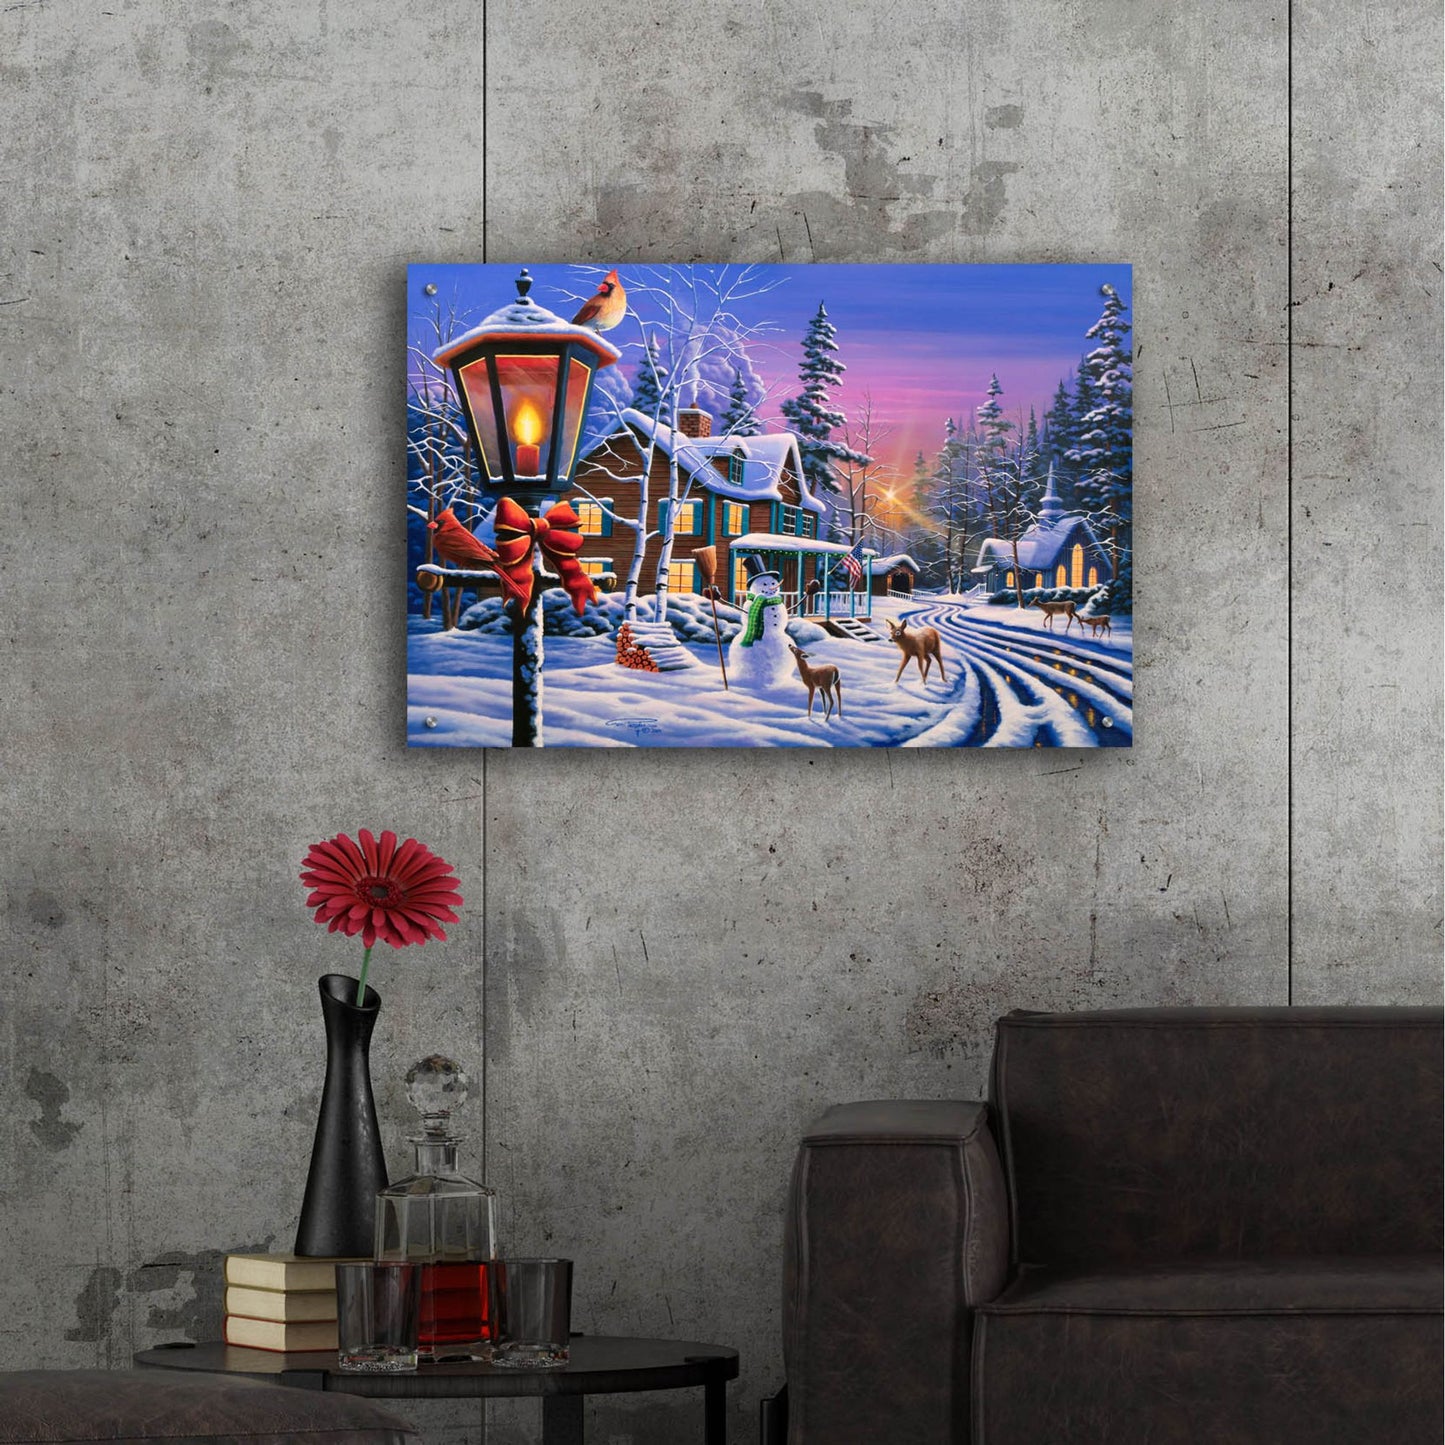 Epic Art 'Christmas Curiosity' by Geno Peoples, Acrylic Glass Wall Art,36x24